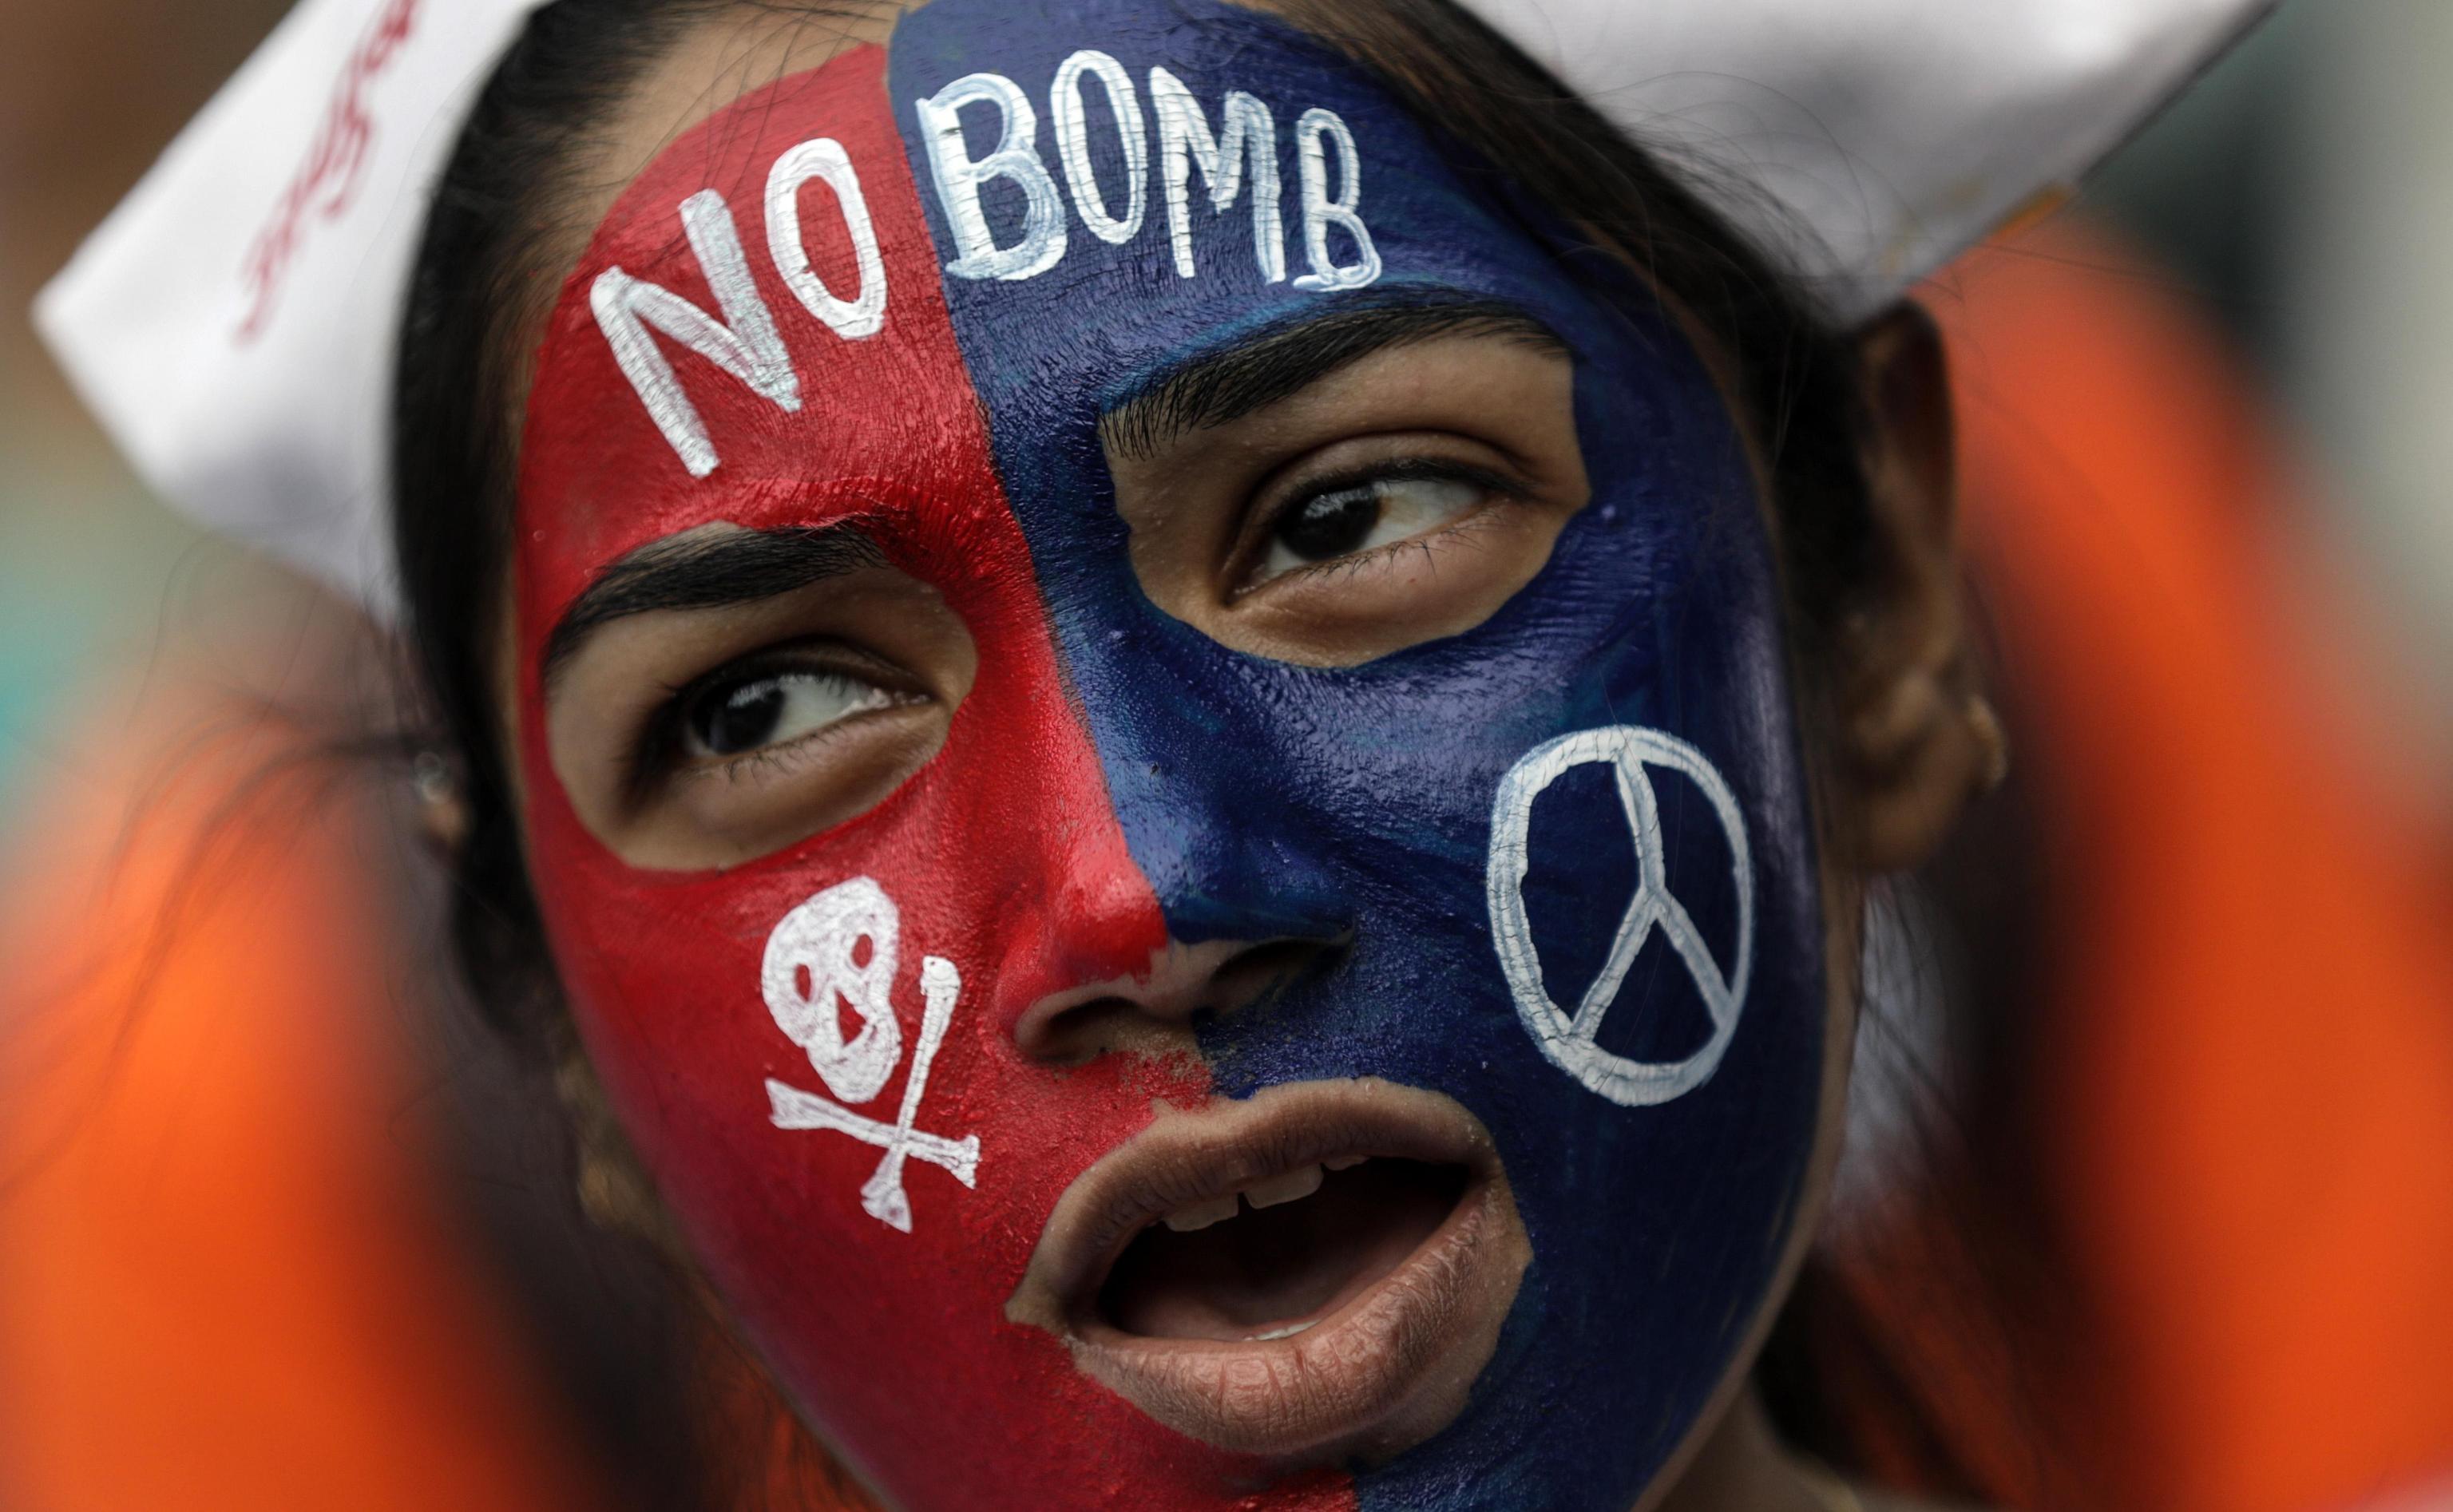 epa06930629 An Indian student with No Bomb messages written on his face take part in a 'Hiroshima Day' peace rally in Mumbai, India, 06 August 2018. Students and social activists gathered in Mumbai to mark the 73rd anniversary of the world's first nuclear bombing in Hiroshima.  EPA/DIVYAKANT SOLANKI